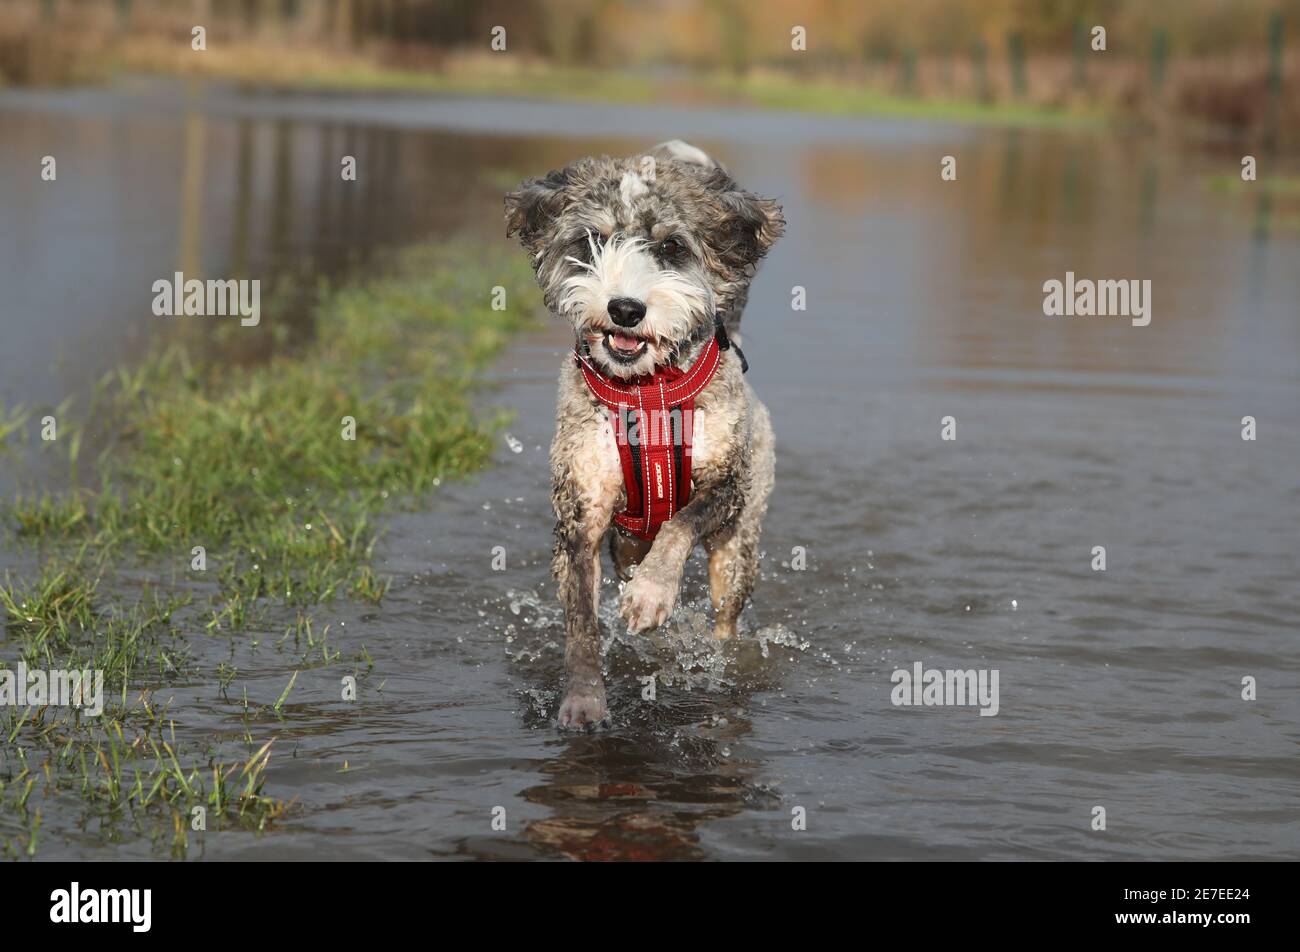 Cookie the cockapoo dog enjoys having a splash in the flooding in Peterborough, Cambridgeshire, as the River Nene full of floodwater from melted snow and heavy rain has overtopped the riverbanks. Stock Photo